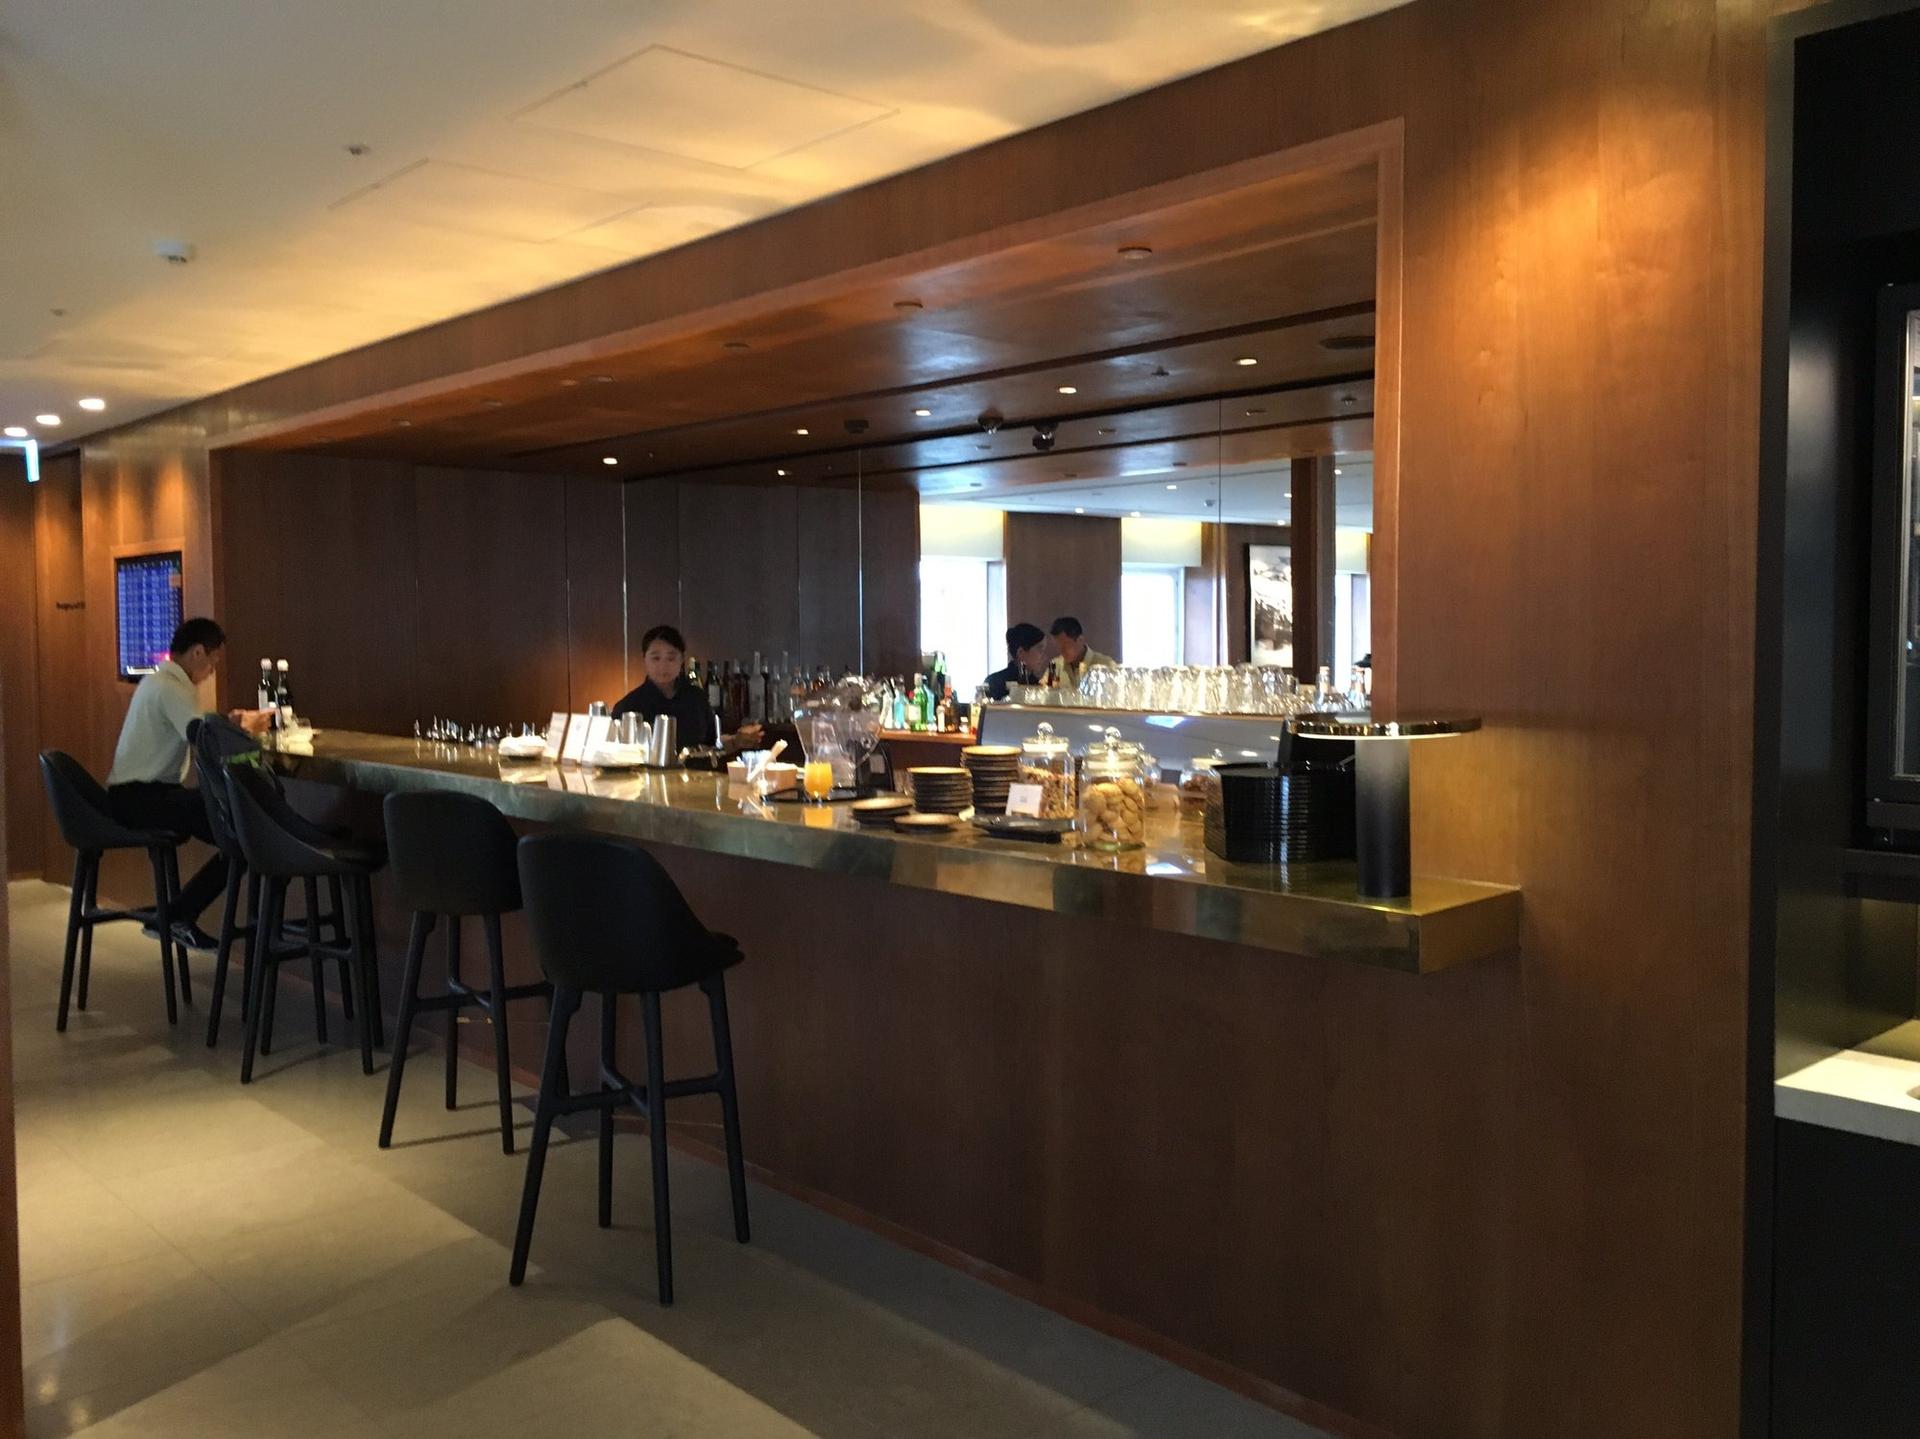 Cathay Pacific Lounge image 34 of 37